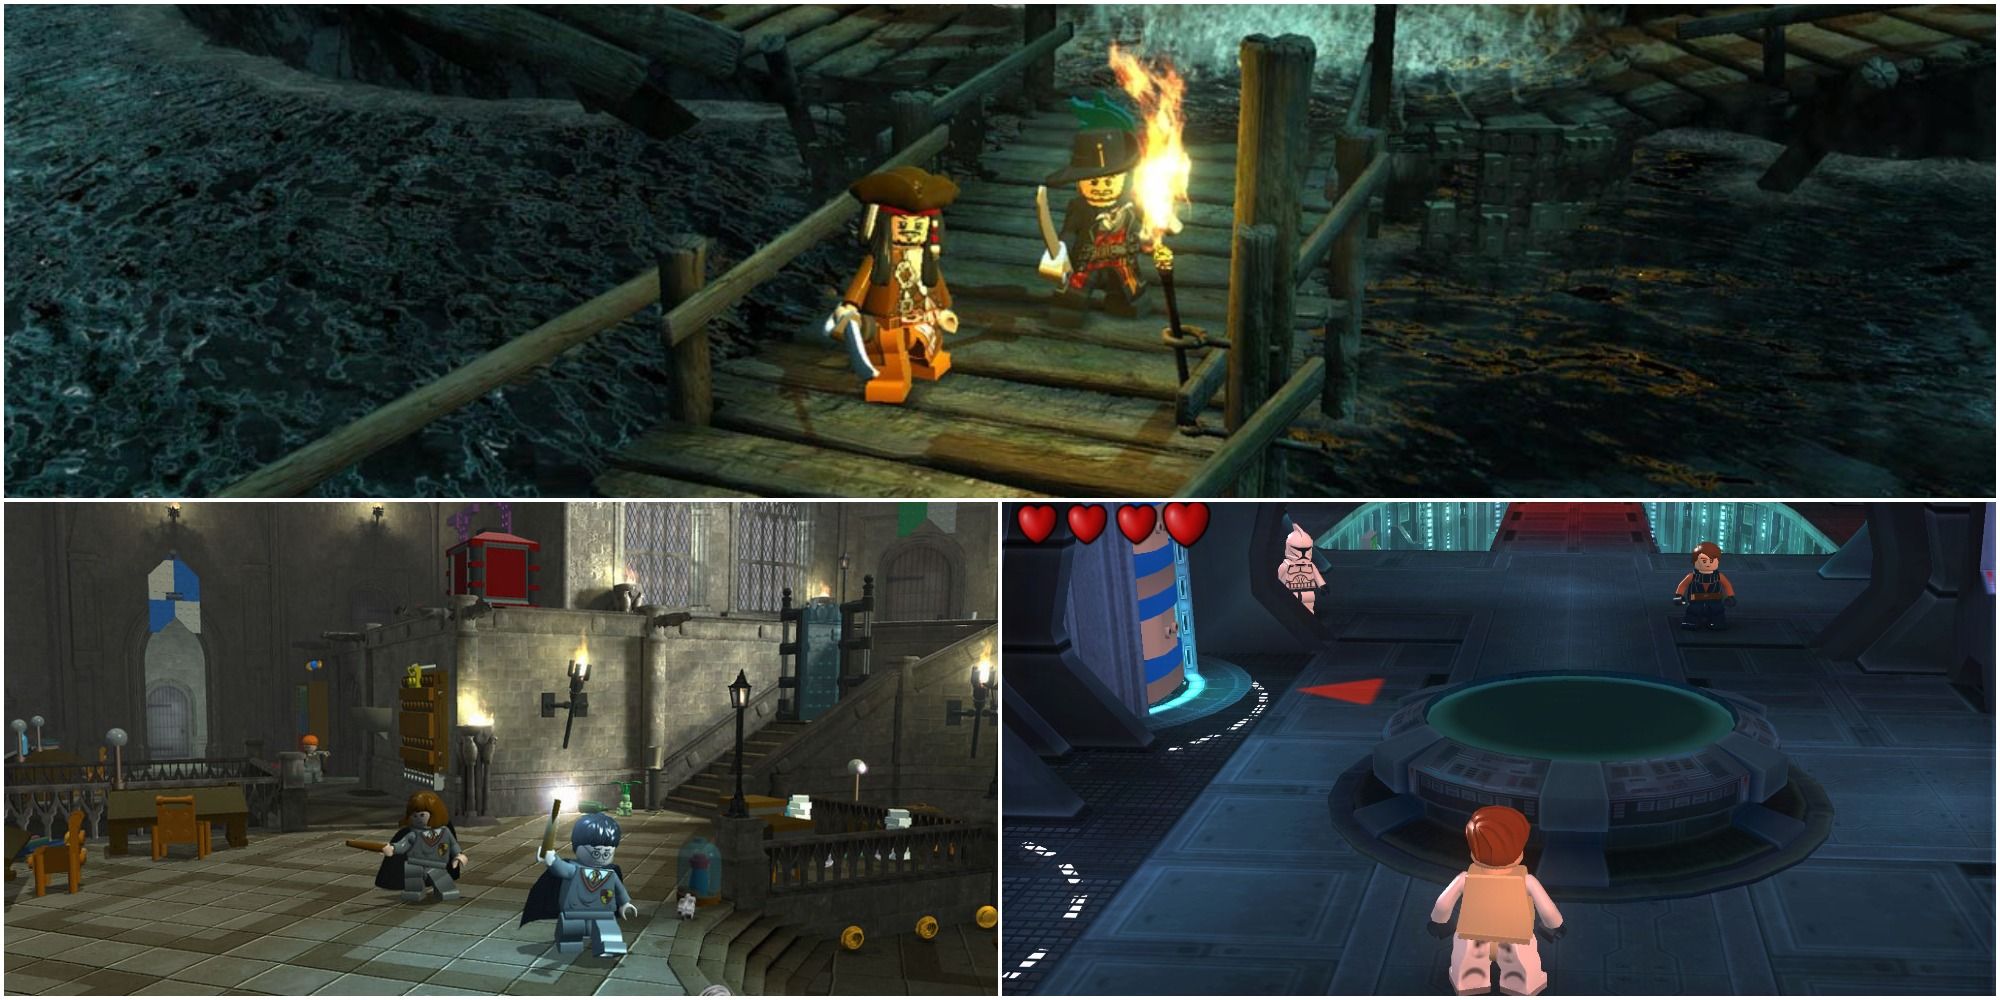 Split image screenshots of Captain Jack Sparrow and pirate companion in Lego Pirates of the Caribbean: The Video Game, Harry Potter and Hermione Granger in Lego Harry Potter: Years 1-4 and a battle scene featuring a Stormtrooper in Lego Star Wars II: The Original Trilogy